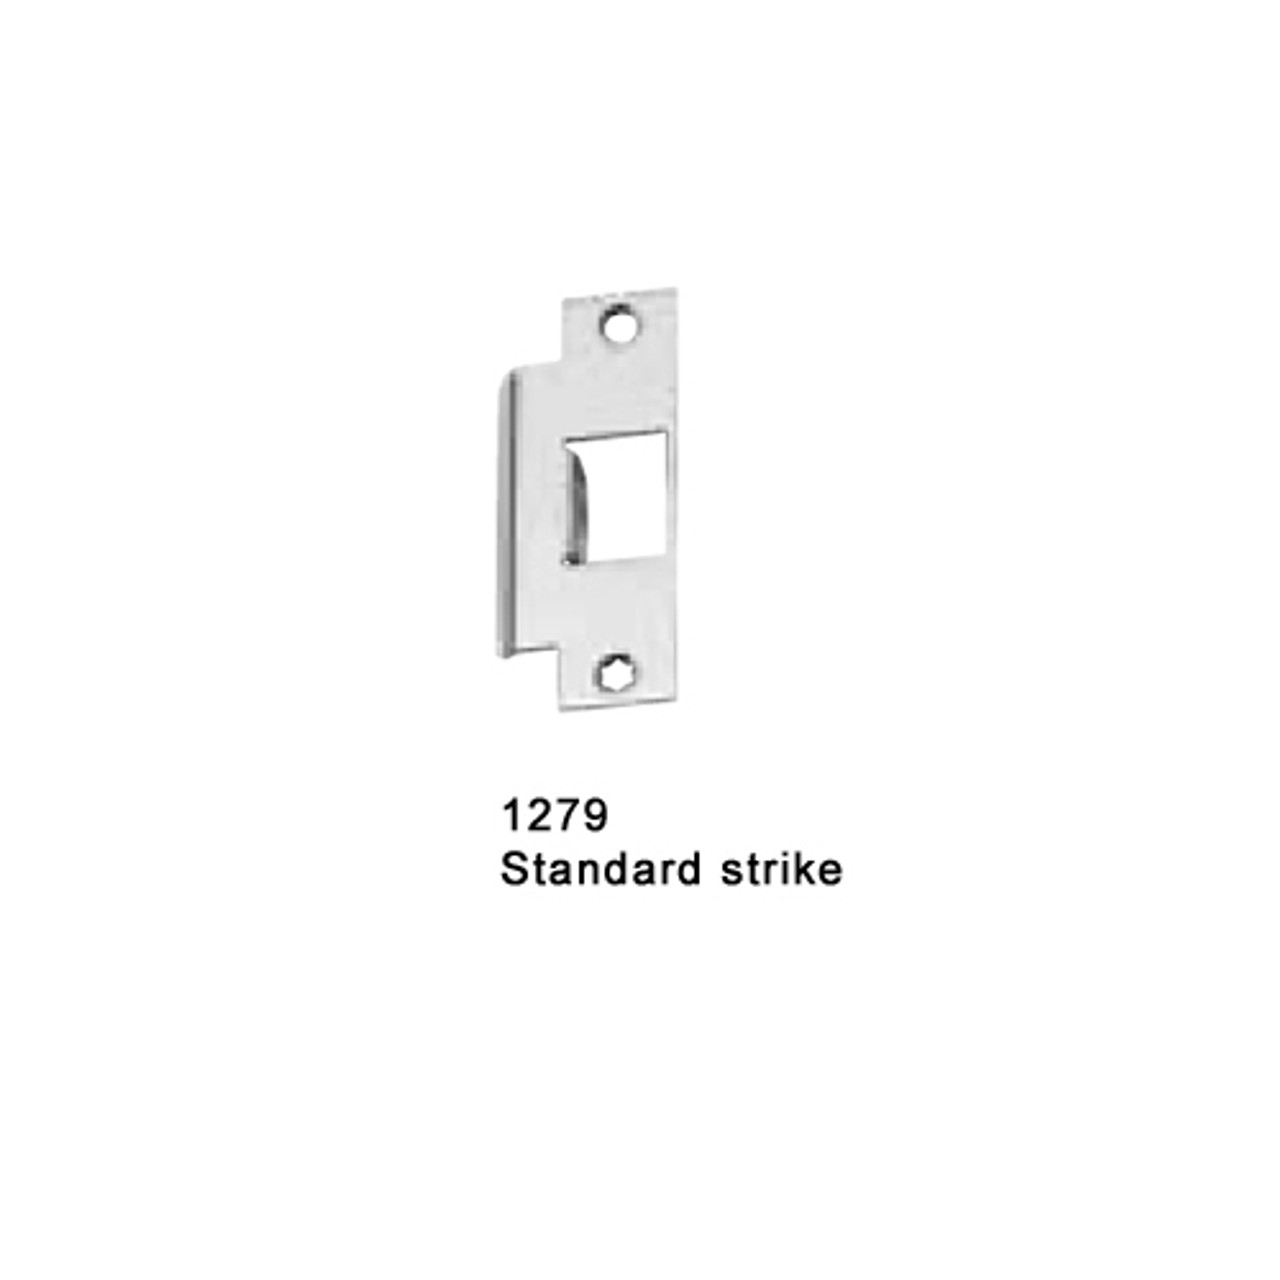 F-25-M-NL-US15-3-RHR Falcon 25 Series Fire Rated Mortise Lock Devices with 512-NL Night Latch in Satin Nickel